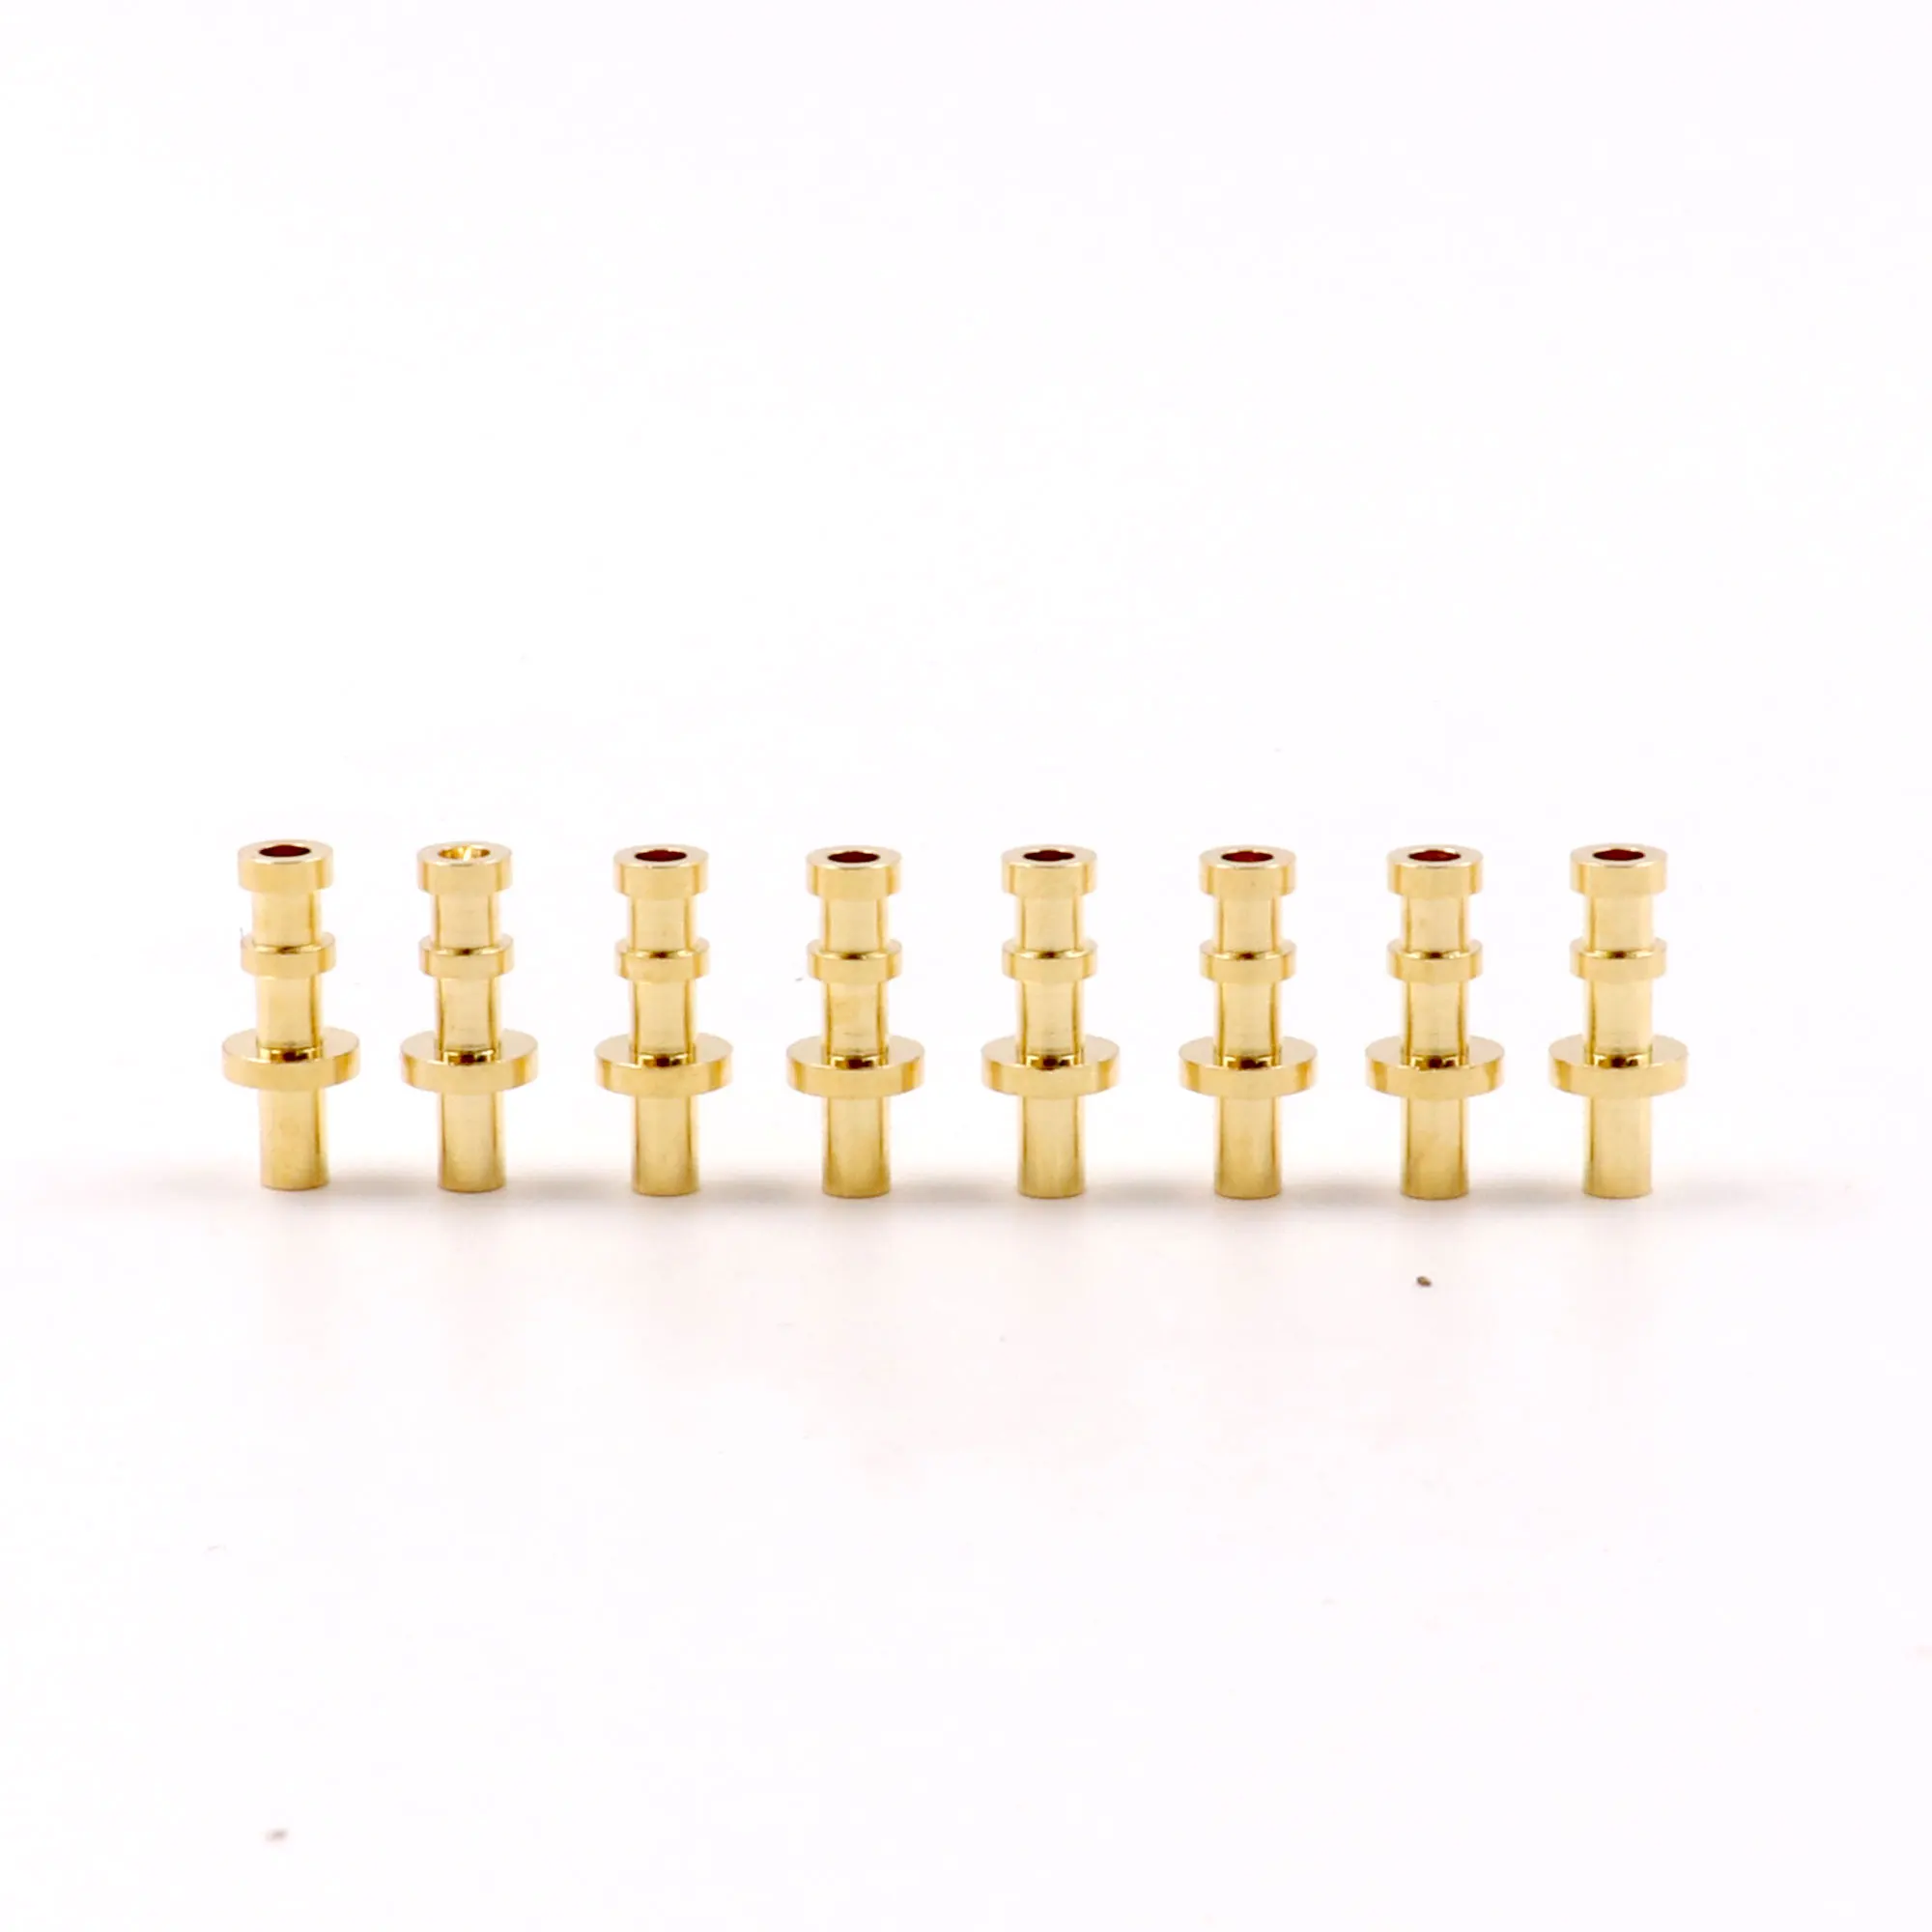 50 pcs Tin Plated Turrets Posts Lugs FOR 2mm Tube Guitar Amp DIY Tag Board 